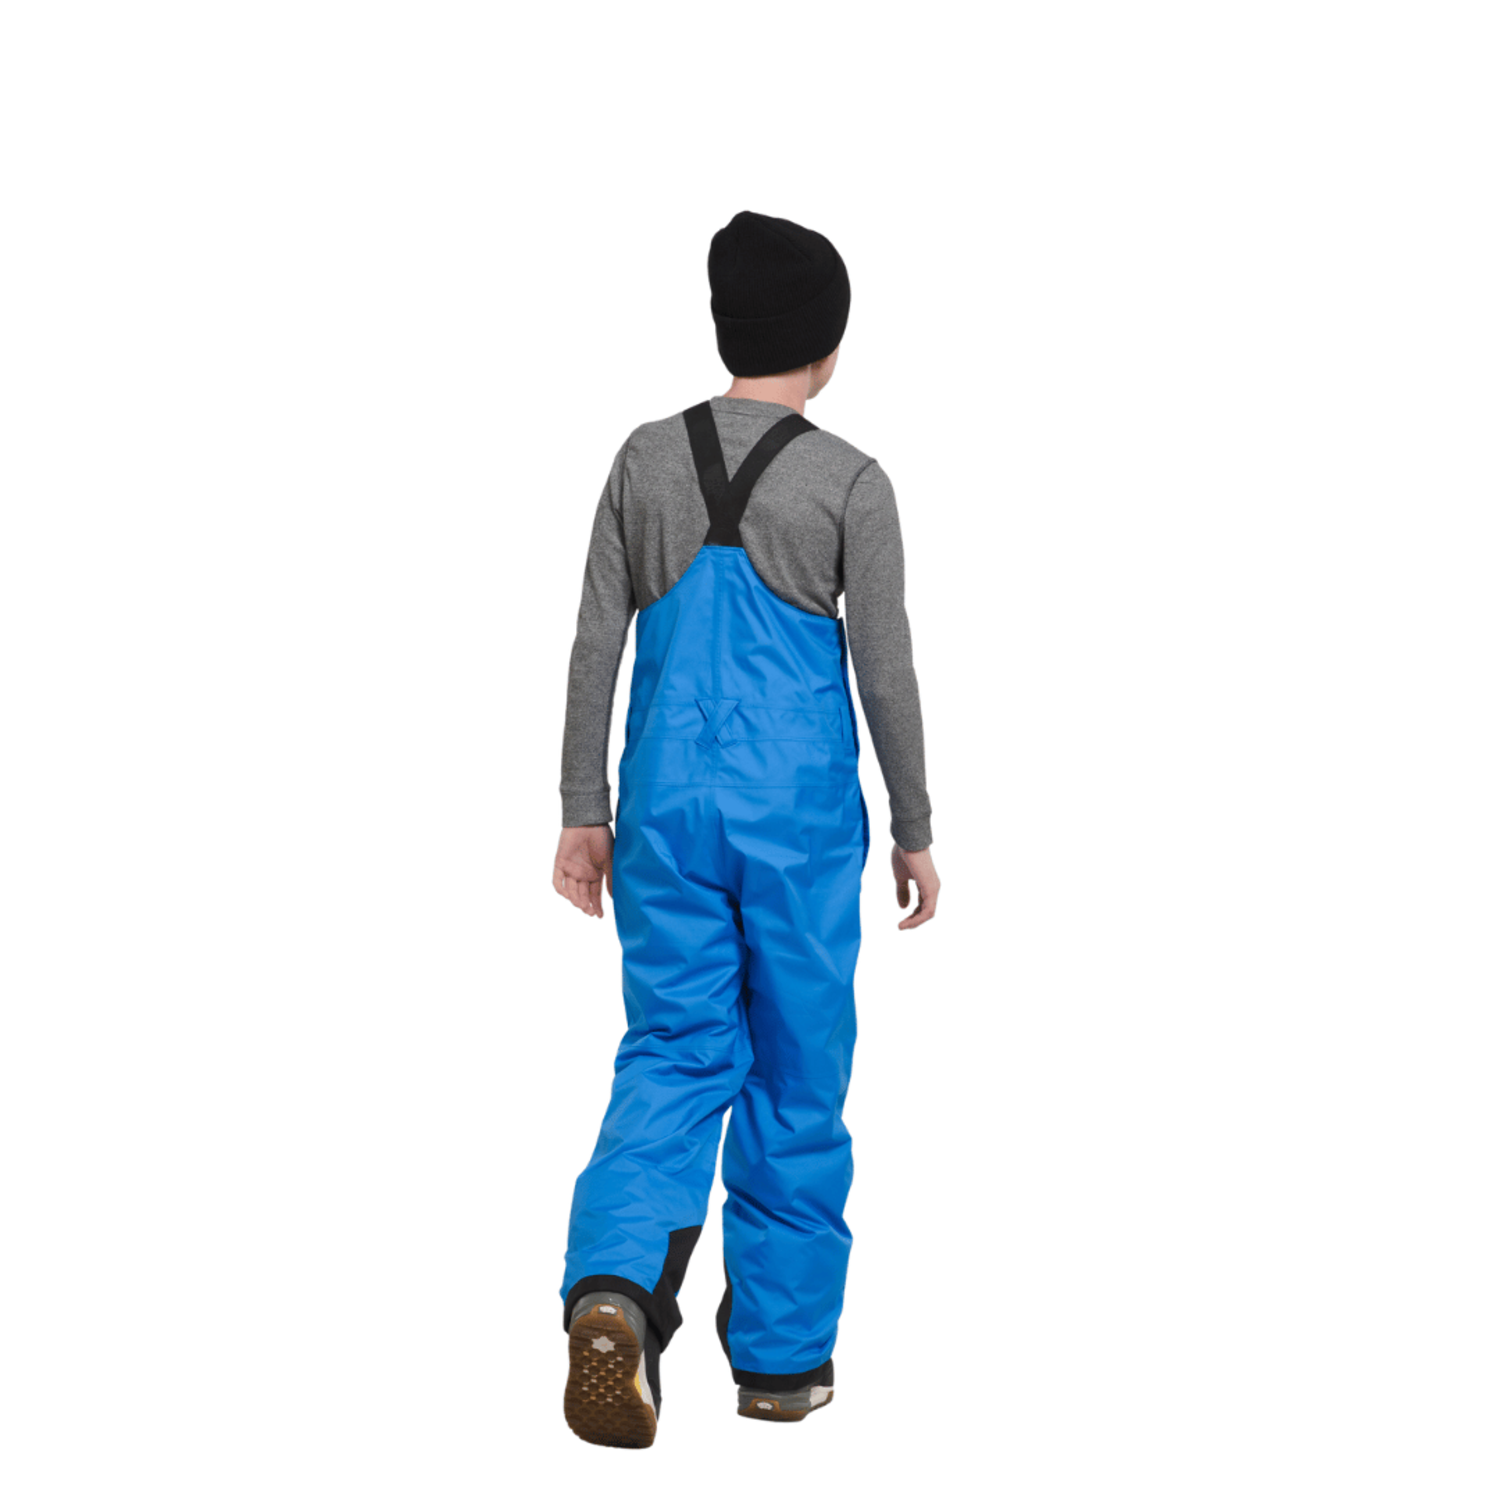 The North Face Freedom Insulated Bib - Kids' - Kids